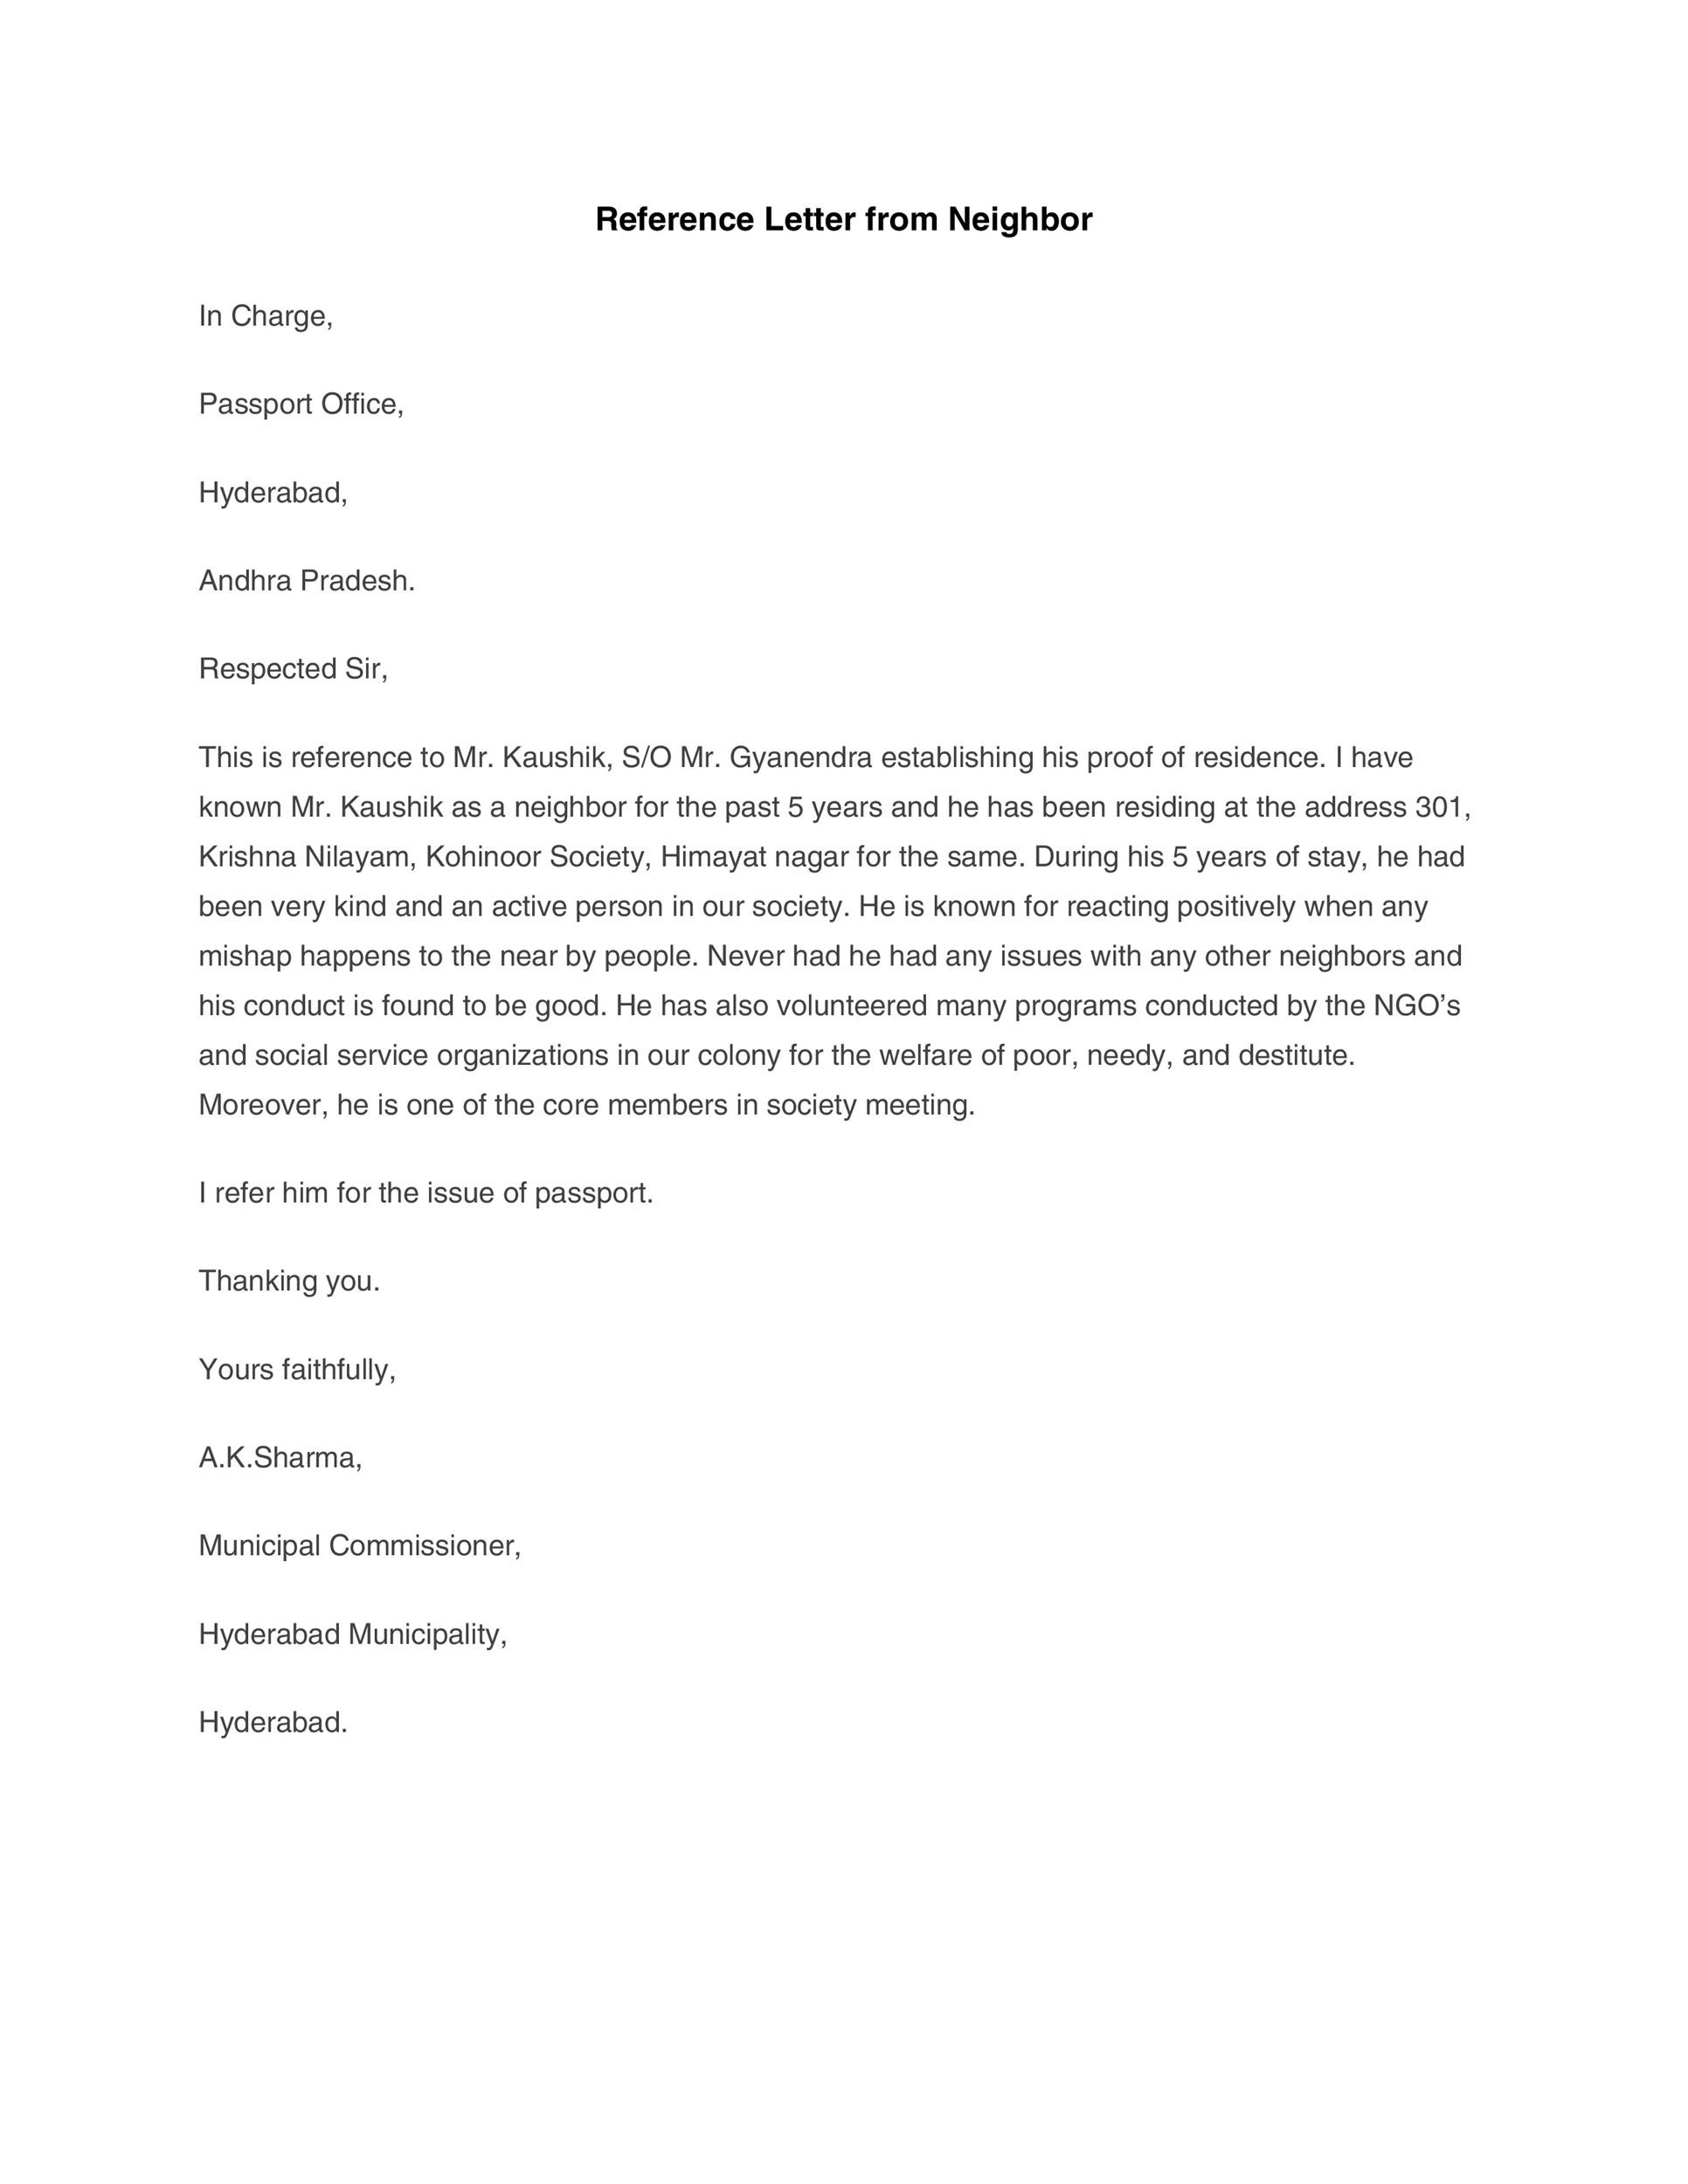 postgraduate-reference-letter-template-co-worker-reference-letter